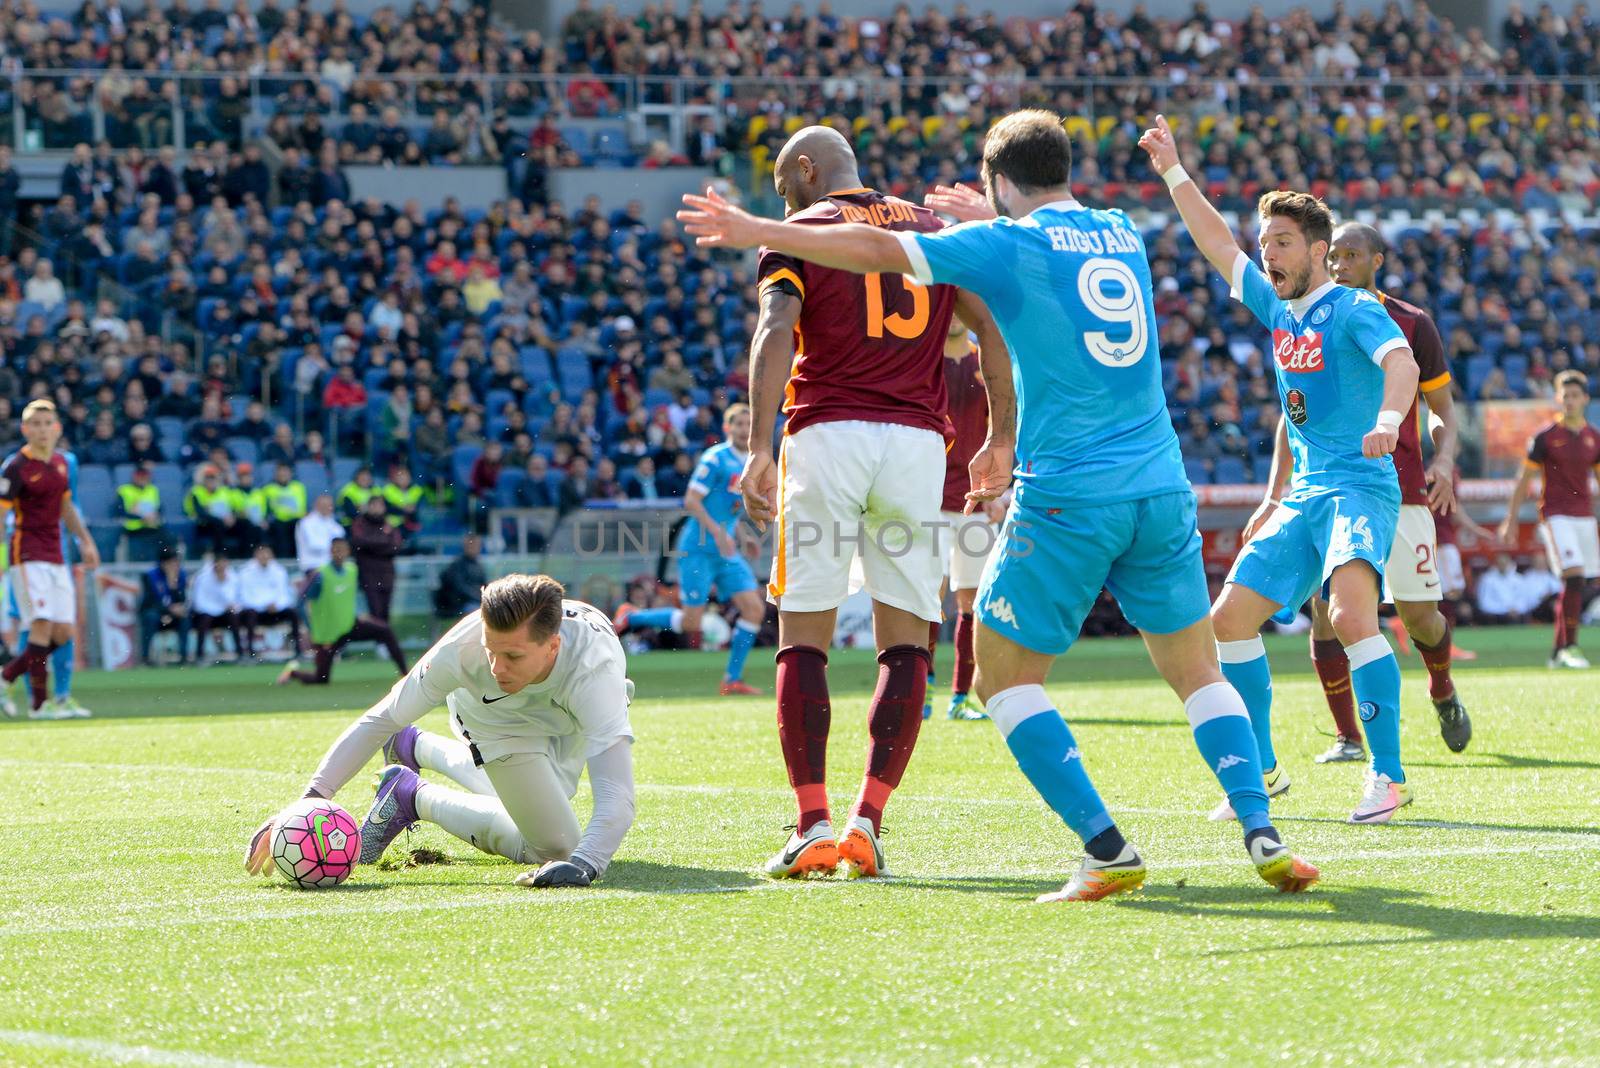 ITALY, Rome: Wojciech Szczesny during the Italian Serie A football match A.S. Roma vs S.S.C. Napoli at the Olympic Stadium in Rome, on April 25, 2016